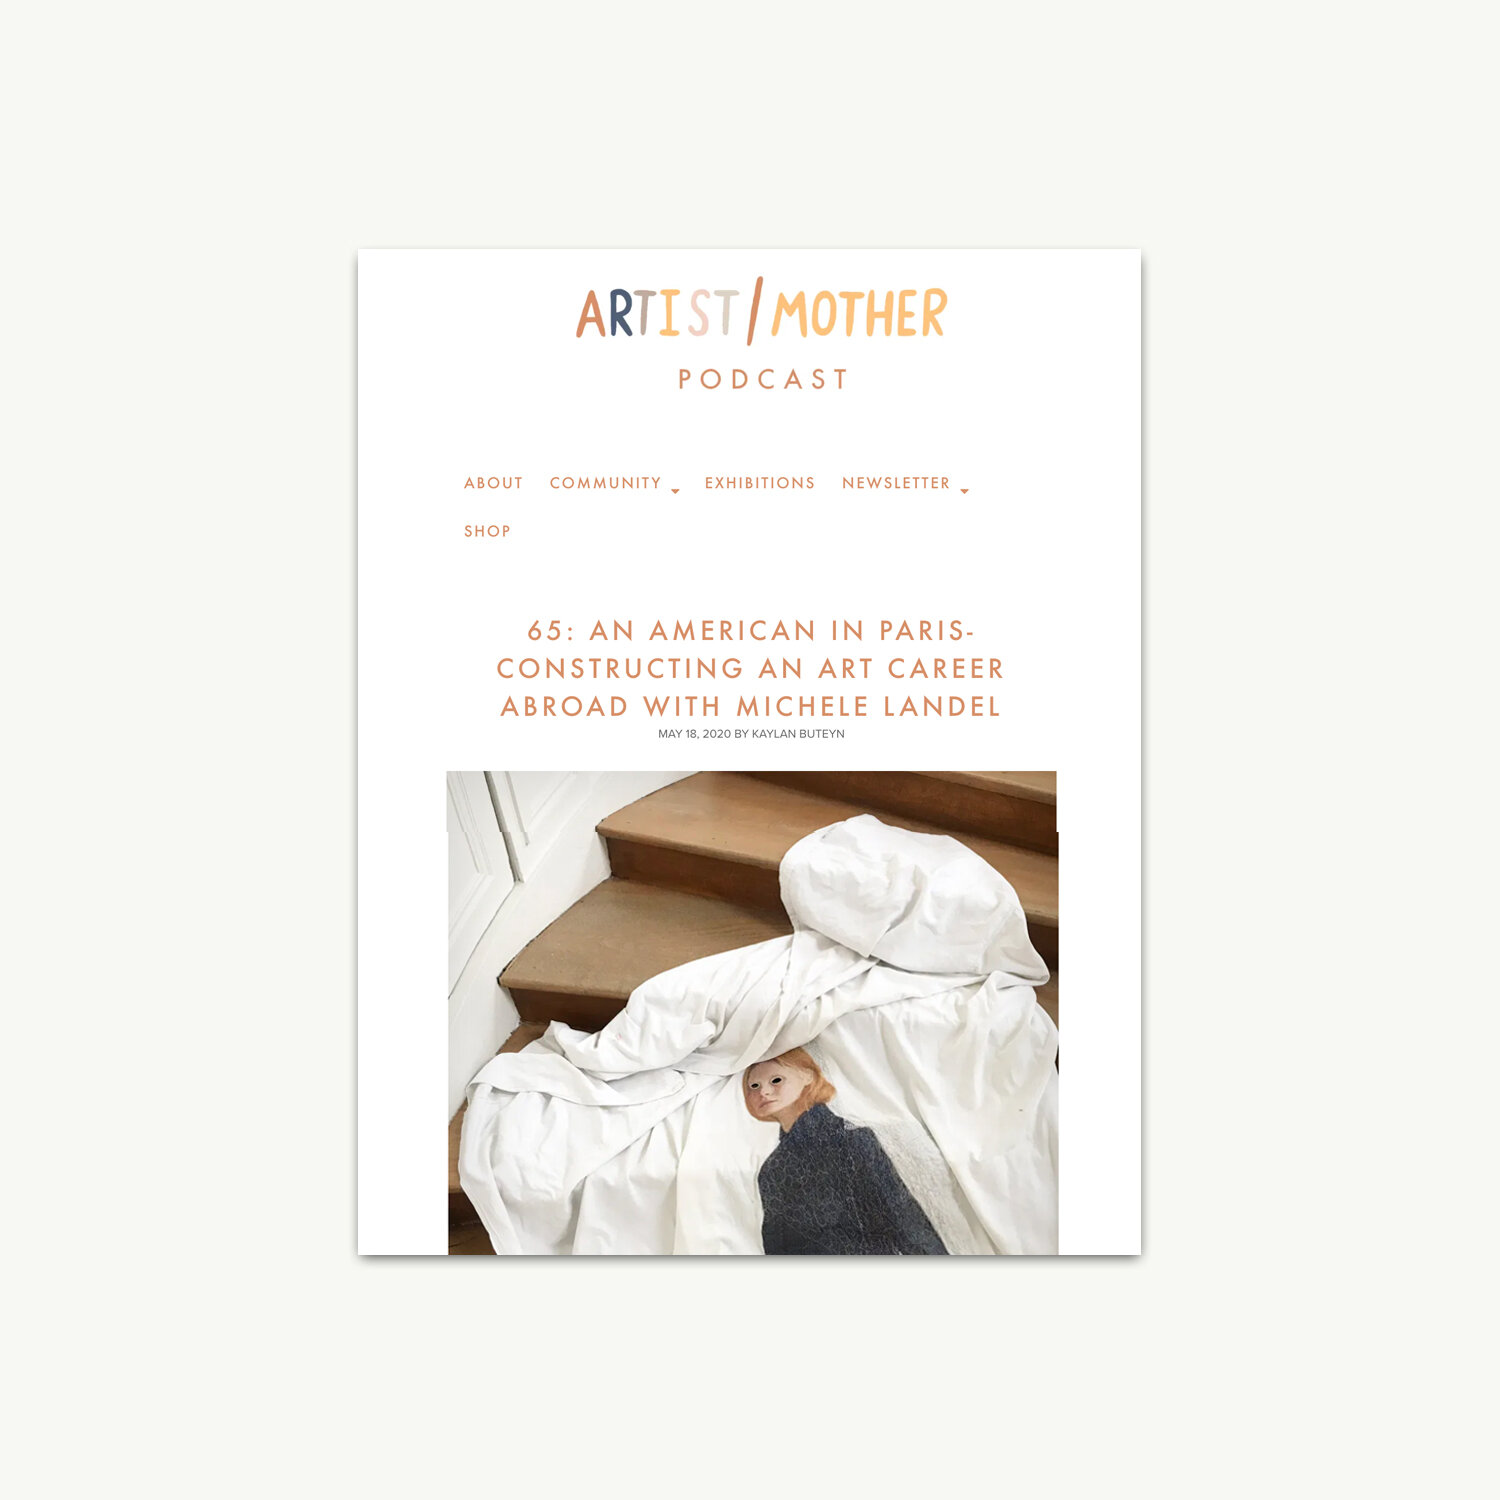    Artist Mother Podcast #65   podcast An American in Paris - Constructing an Art Career Abroad with Michele Landel 